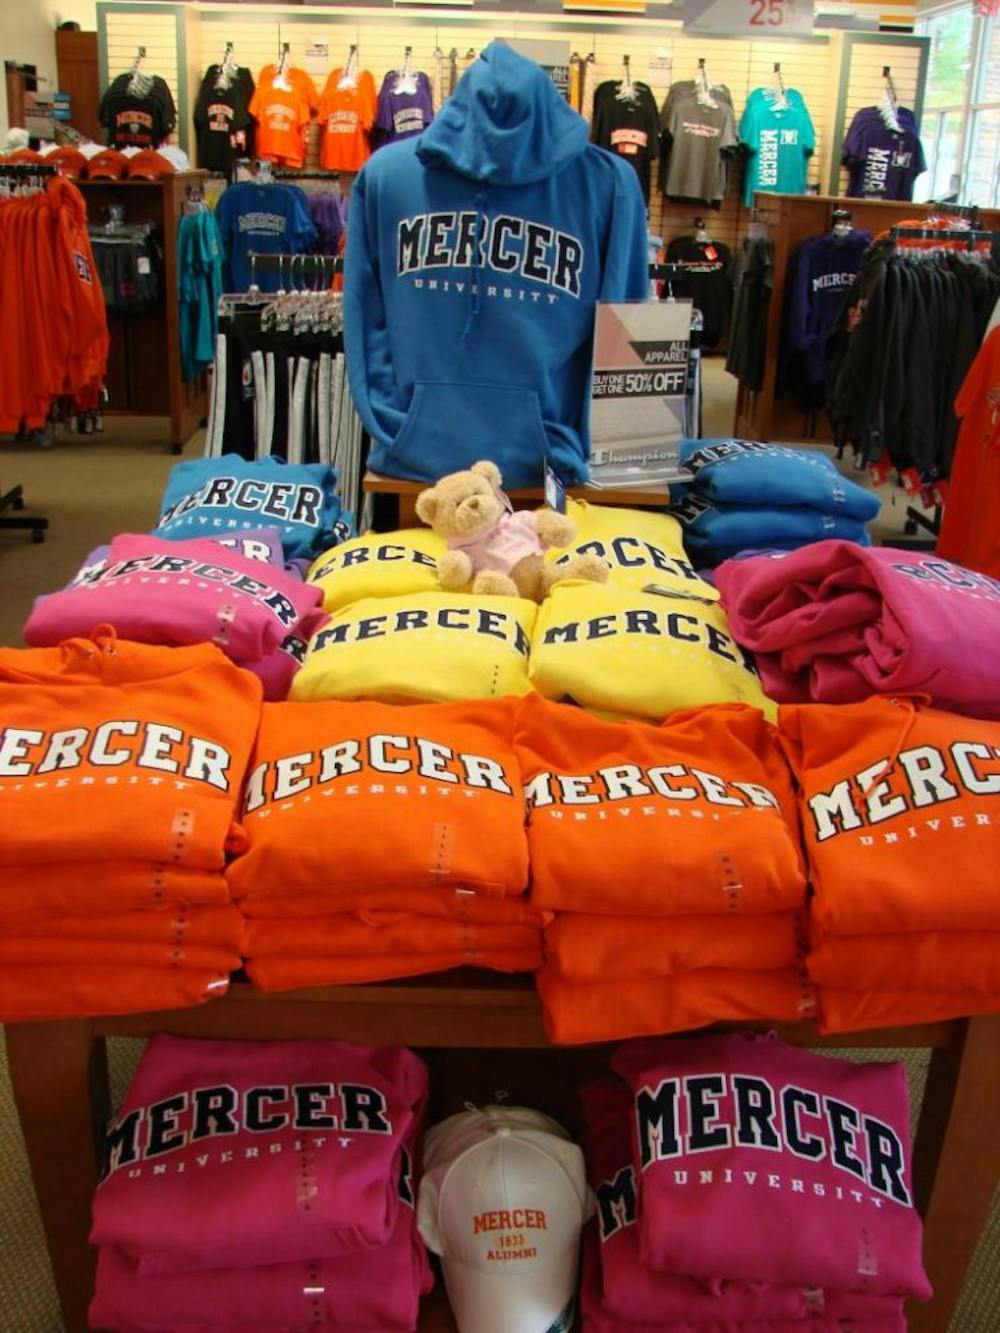 Going to the internet instead of the Mercer bookstore might save you money, but you won’t find enough Mercer hoodies.